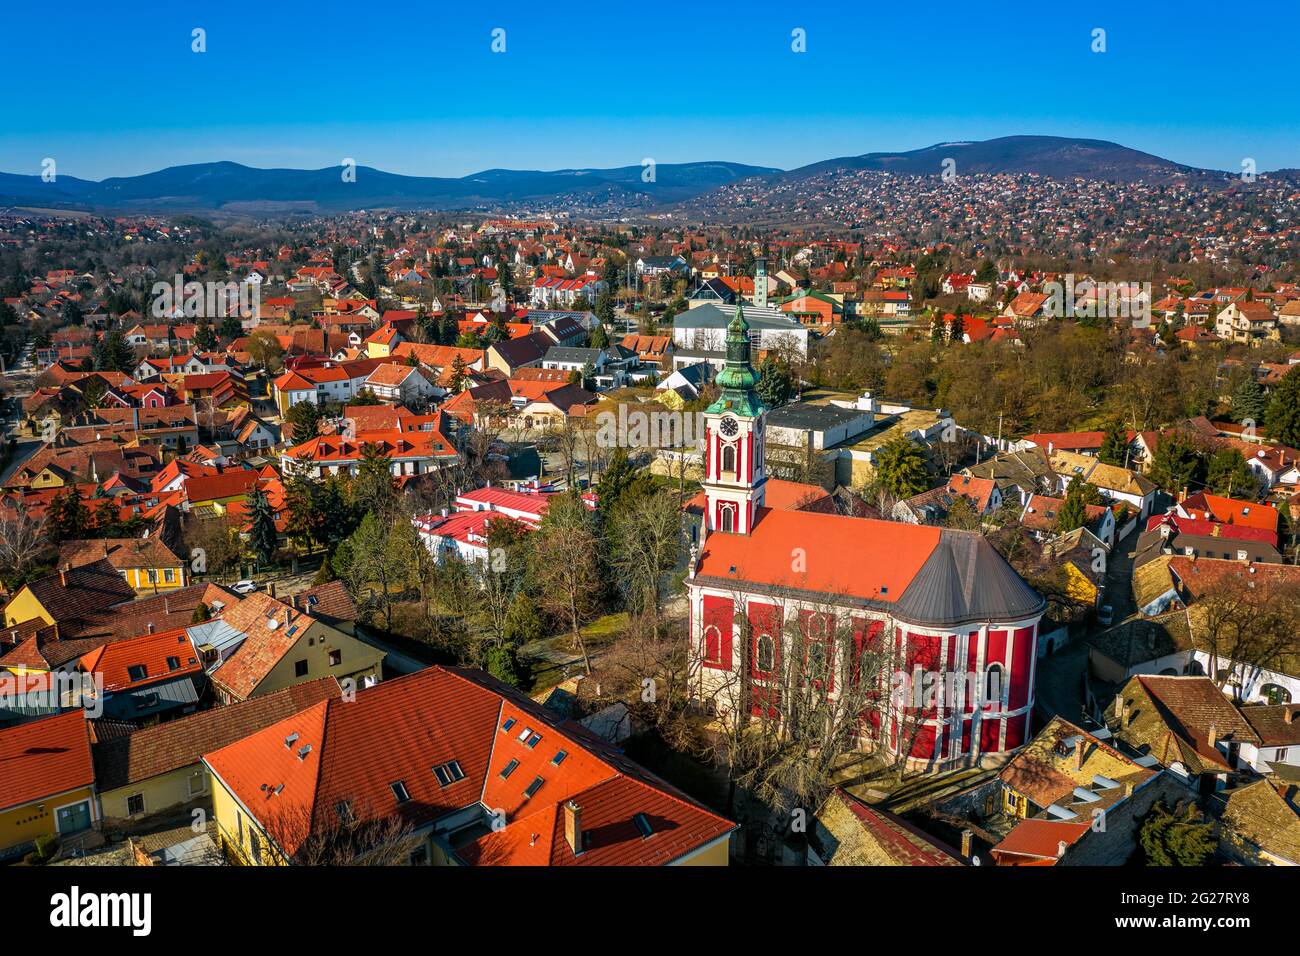 Szentendre, hungary - Aerial view of the city of Szentendre on a bright sunny day with Belgrade Serbian Orthodox Cathedral with clear blue sky Stock Photo